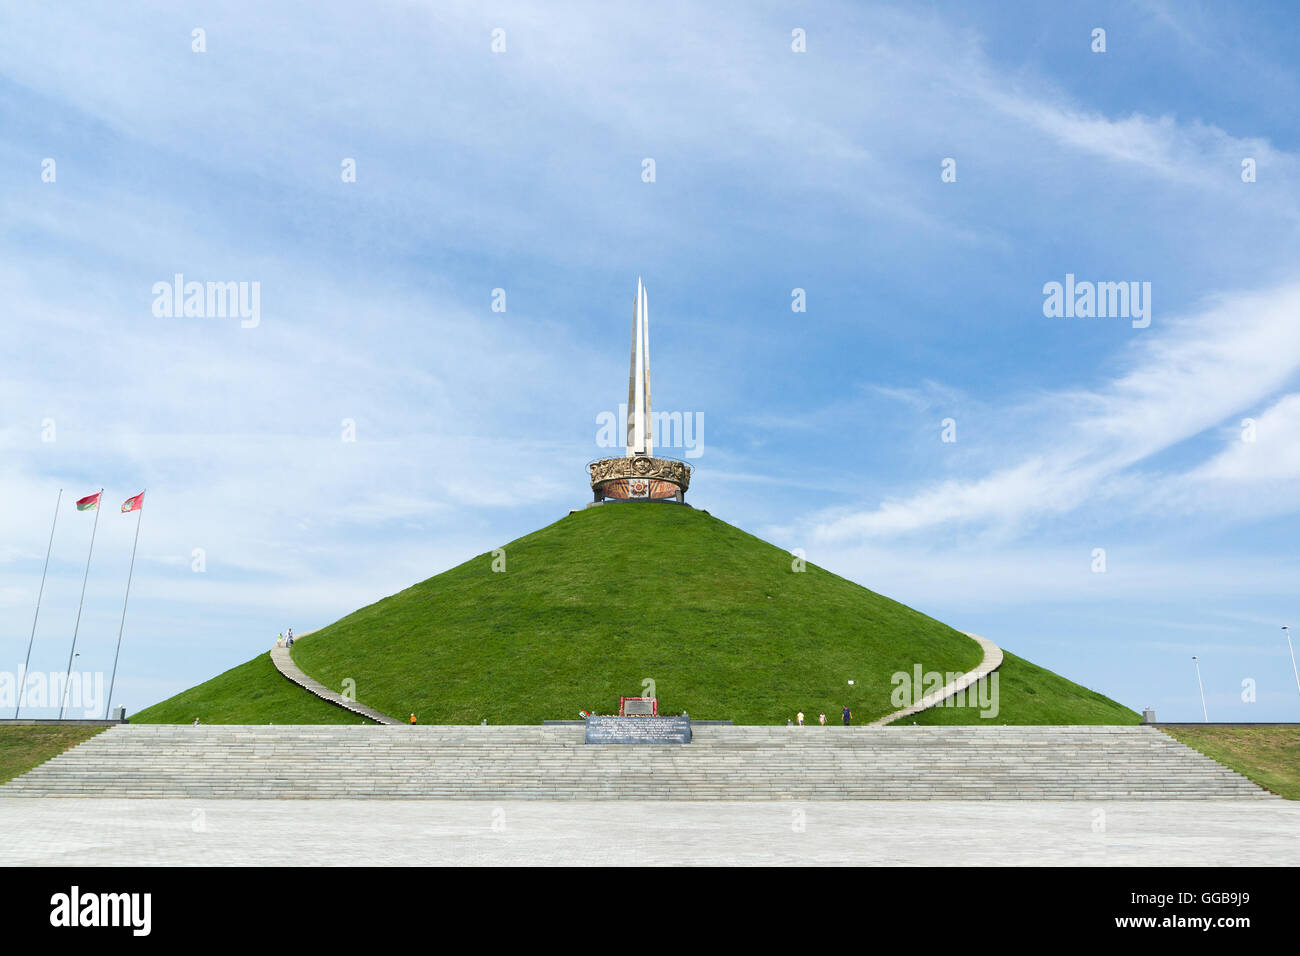 Minsk, Belarus - July 17, 2016: memorial complex 'Hill of Glory' is a monument to the Great Patriotic War in Belarus. Stock Photo